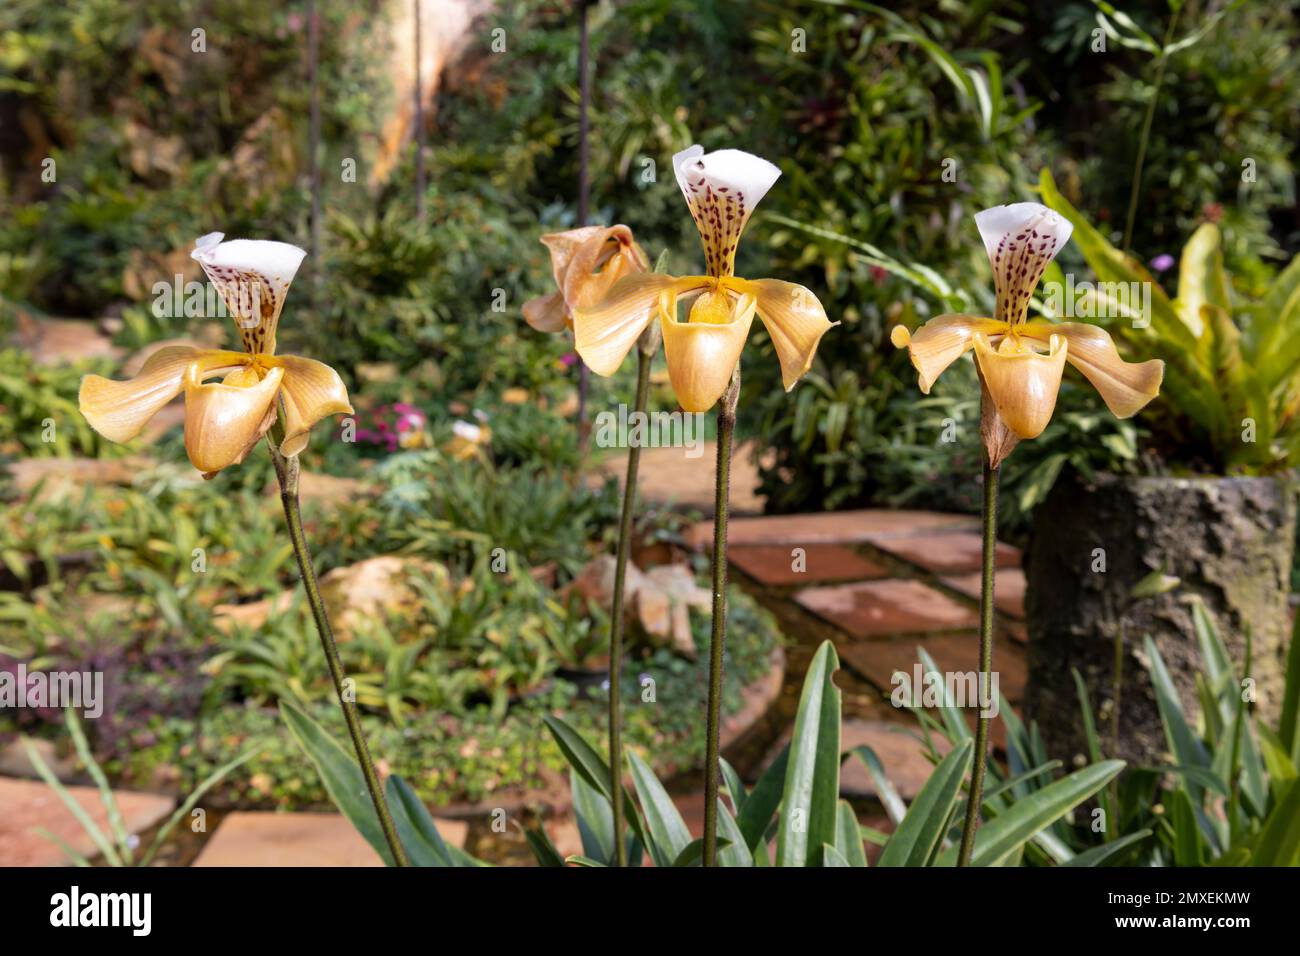 Ward's Paphiopedilum Orchid in Bloom Orange and white color Stock Photo